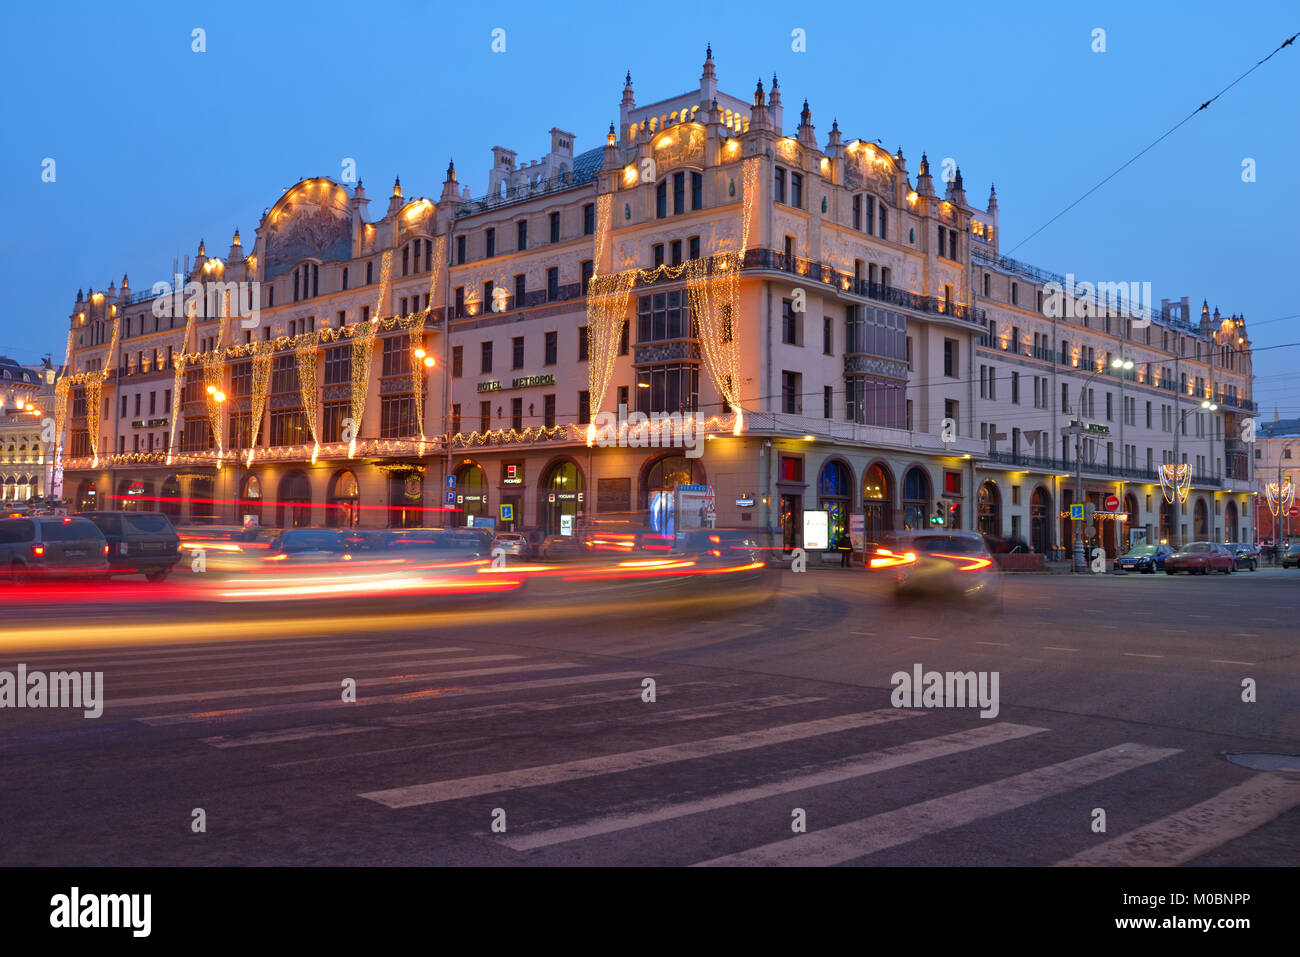 Moscow, Russia - February 6, 2014: Building of the hotel Metropol in evening. Built in 1899-1905, it is the remarkable monument of the modern style ar Stock Photo